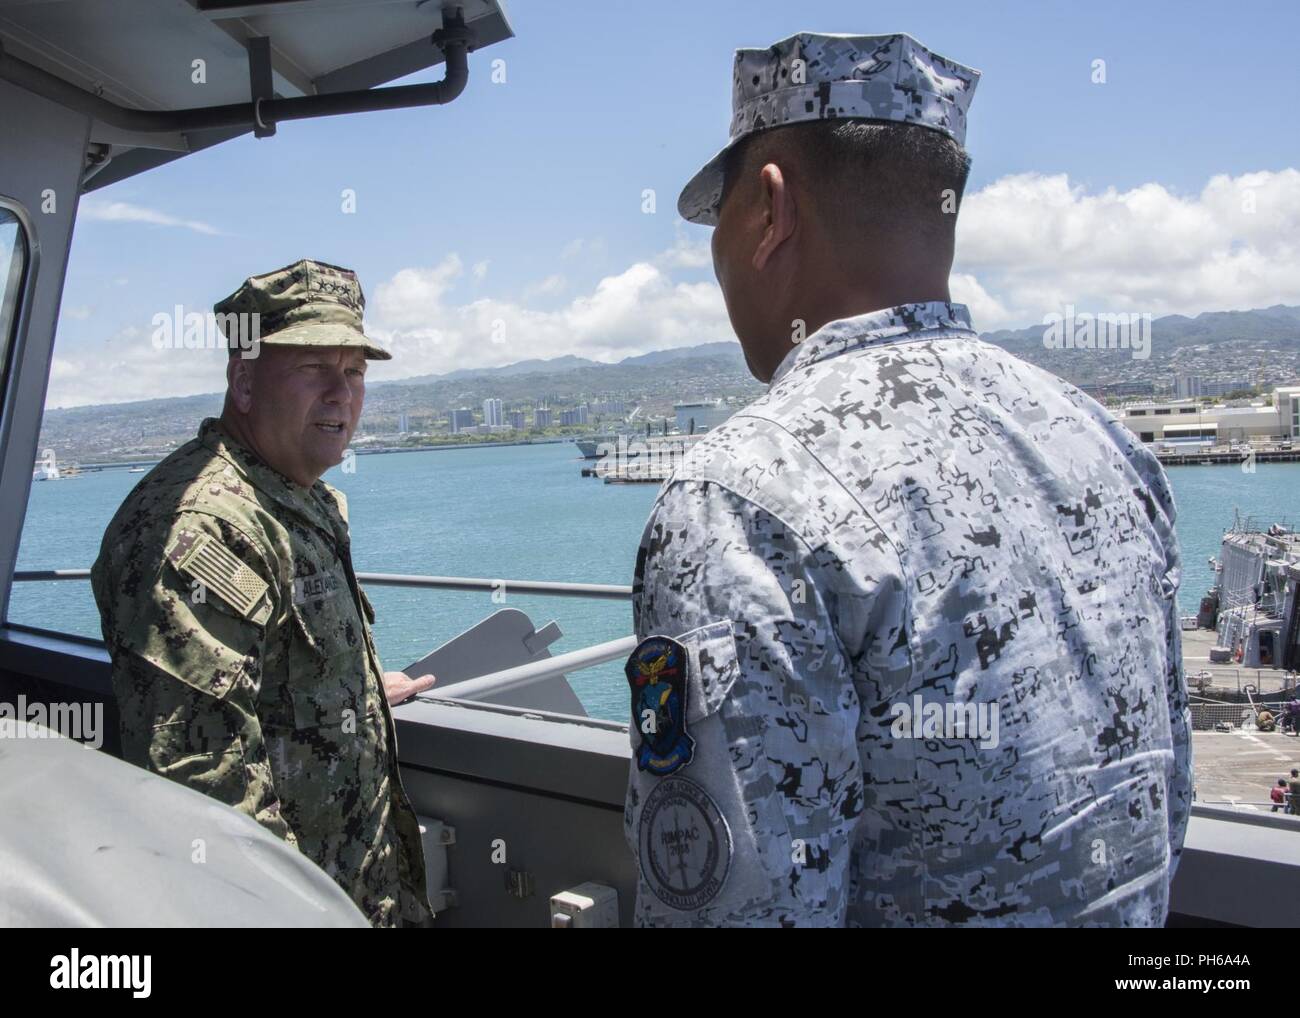 PEARL HARBOR (June 29, 2018) Vice Adm. John D. Alexander, commander, U.S. 3rd Fleet, speaks with the Philippine Navy landing platform dock BRP Davao Del Sur (LD 602) Commanding Officer, Capt. Richard M. David, while on the bridge of the ship, June 29.  Twenty-five nations, more than 45 ships and submarines, about 200 aircraft and 25,000 personnel are participating in RIMPAC from June 27 to Aug. 2 in and around the Hawaiian Islands and Southern California. The world’s largest international maritime exercise, RIMPAC provides a unique training opportunity while fostering and sustaining cooperativ Stock Photo